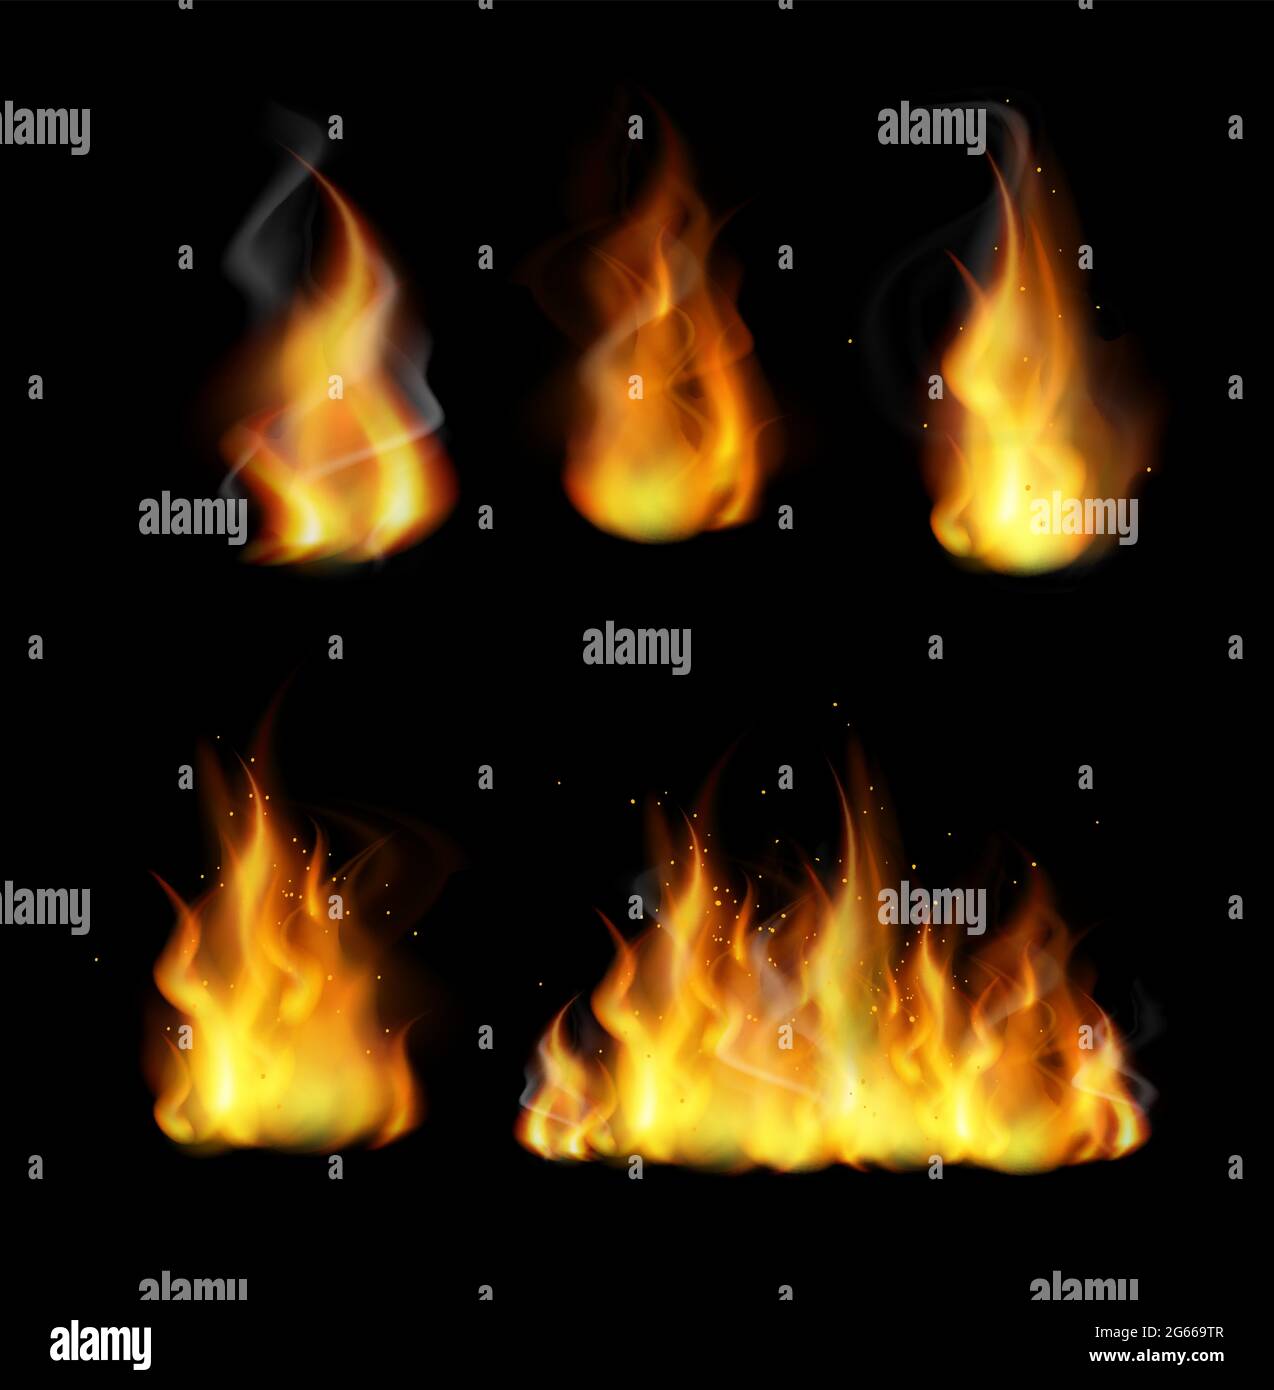 Forks of flame realistic 3d vector illustrations set. Burning yellow bonfire with bright sparks collection isolated on black background. Fireflames Stock Vector